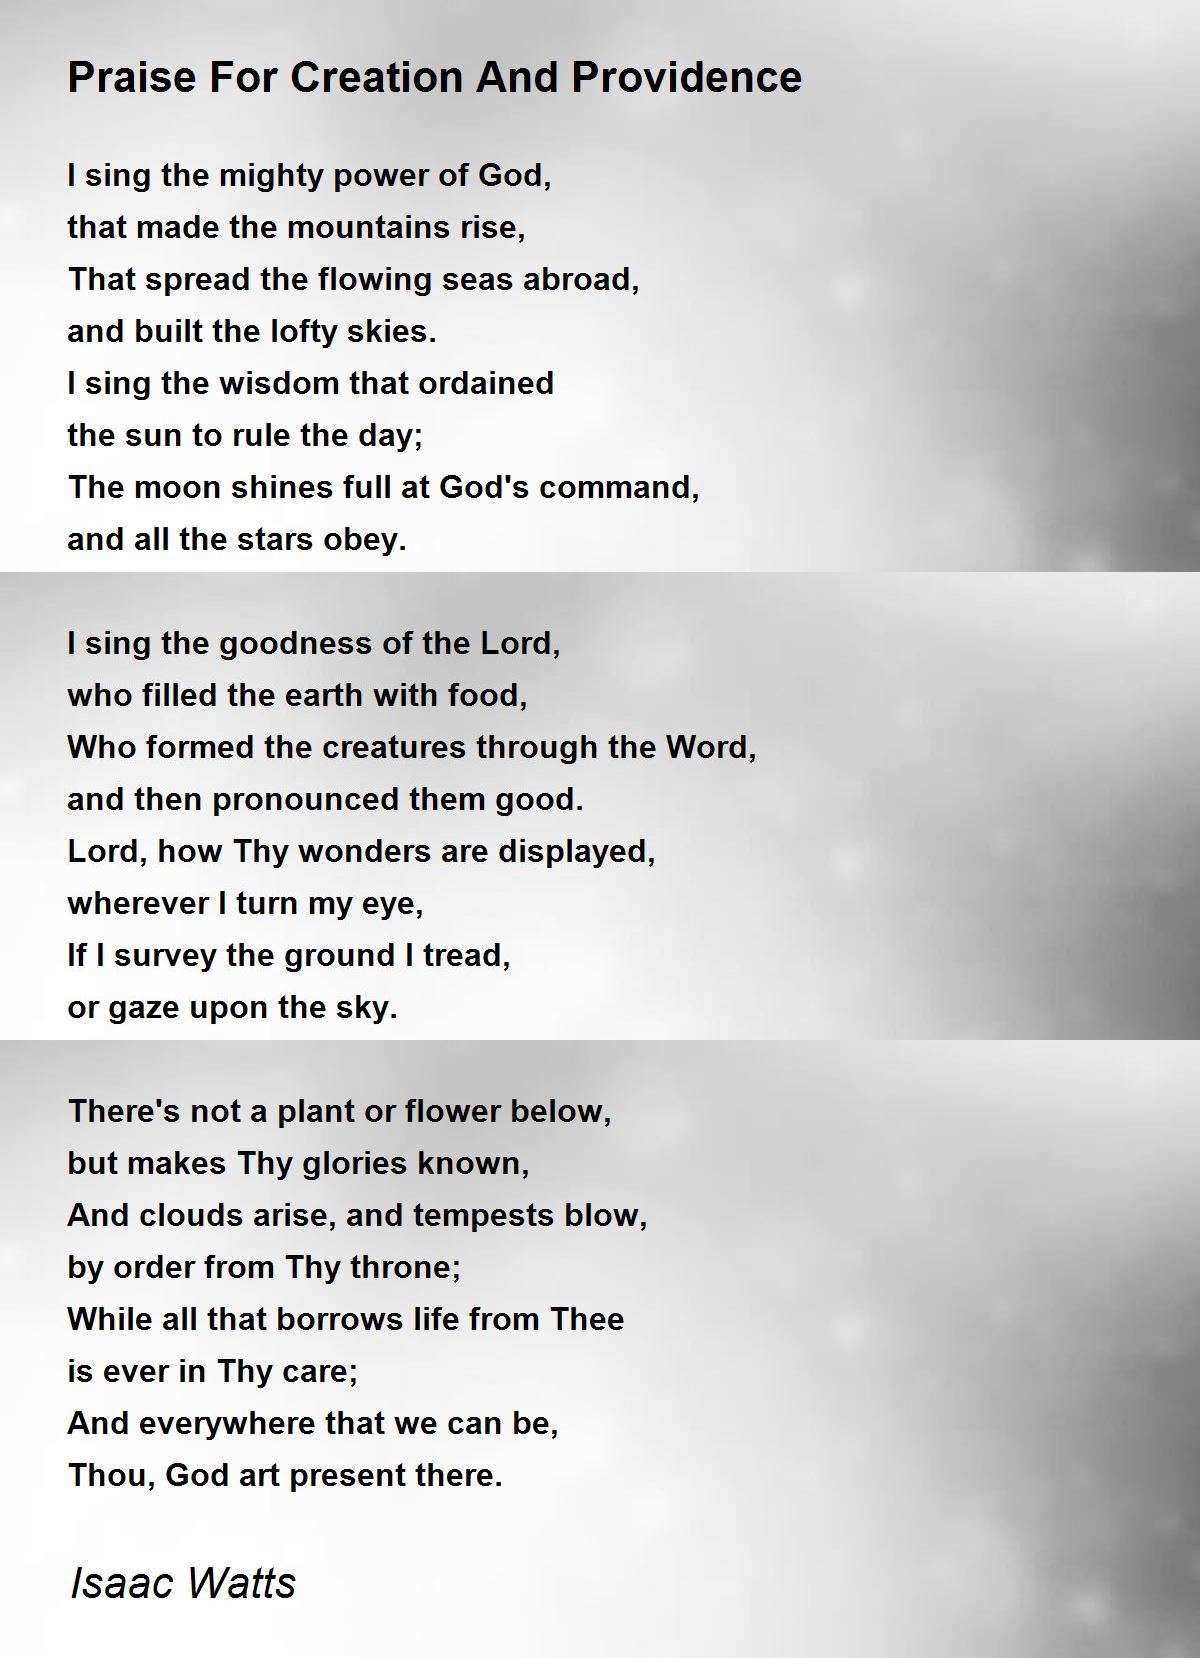 Praise For Creation And Providence Poem by Isaac Watts 